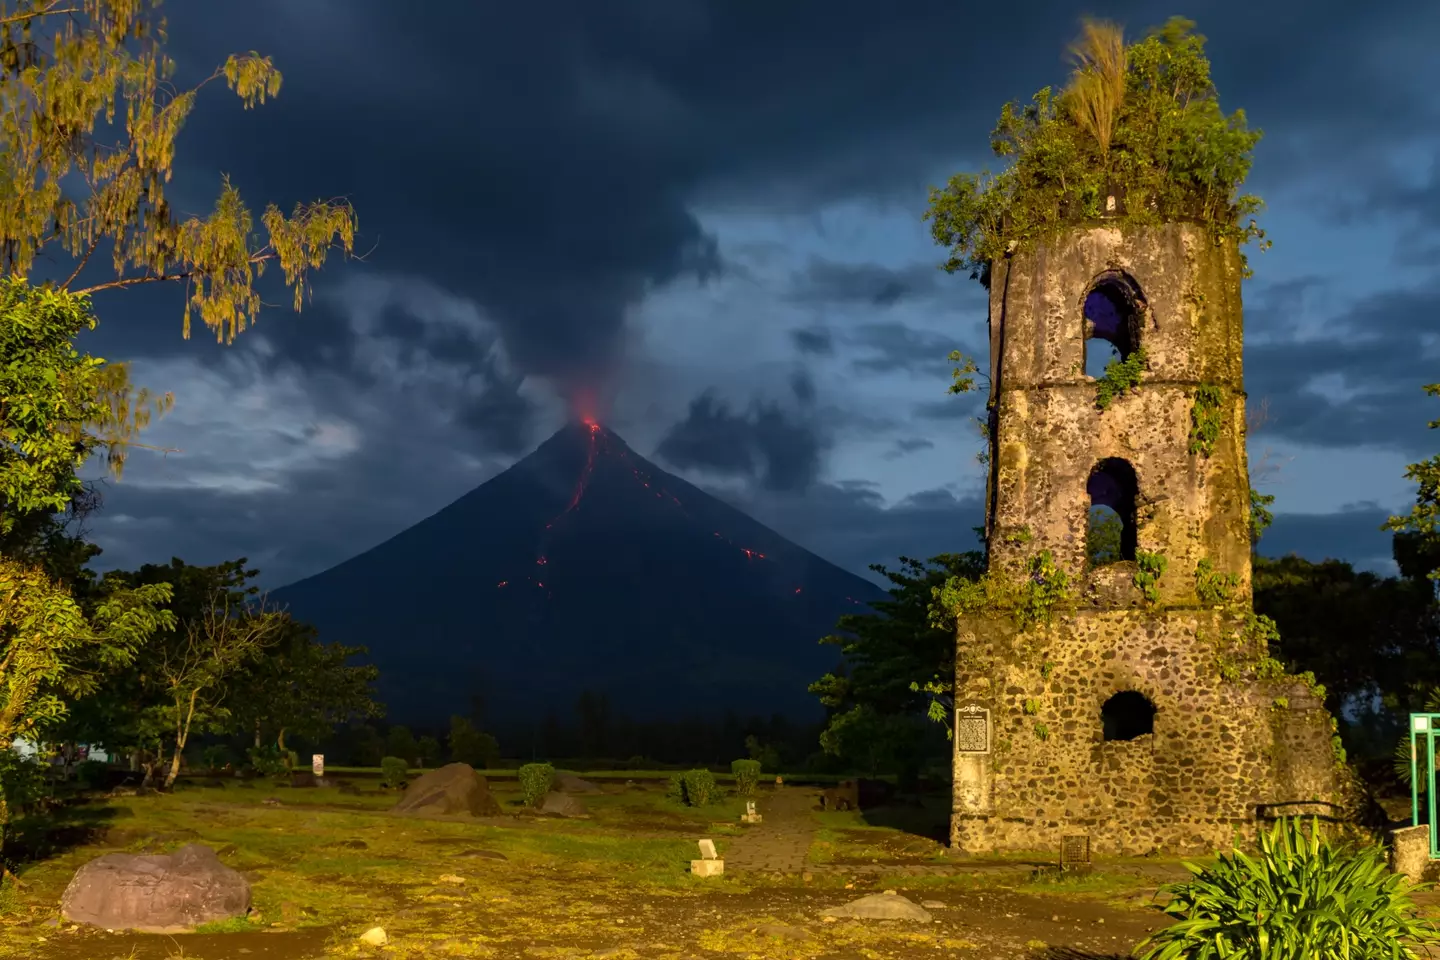 Mayon Volcano last erupted in 2018.